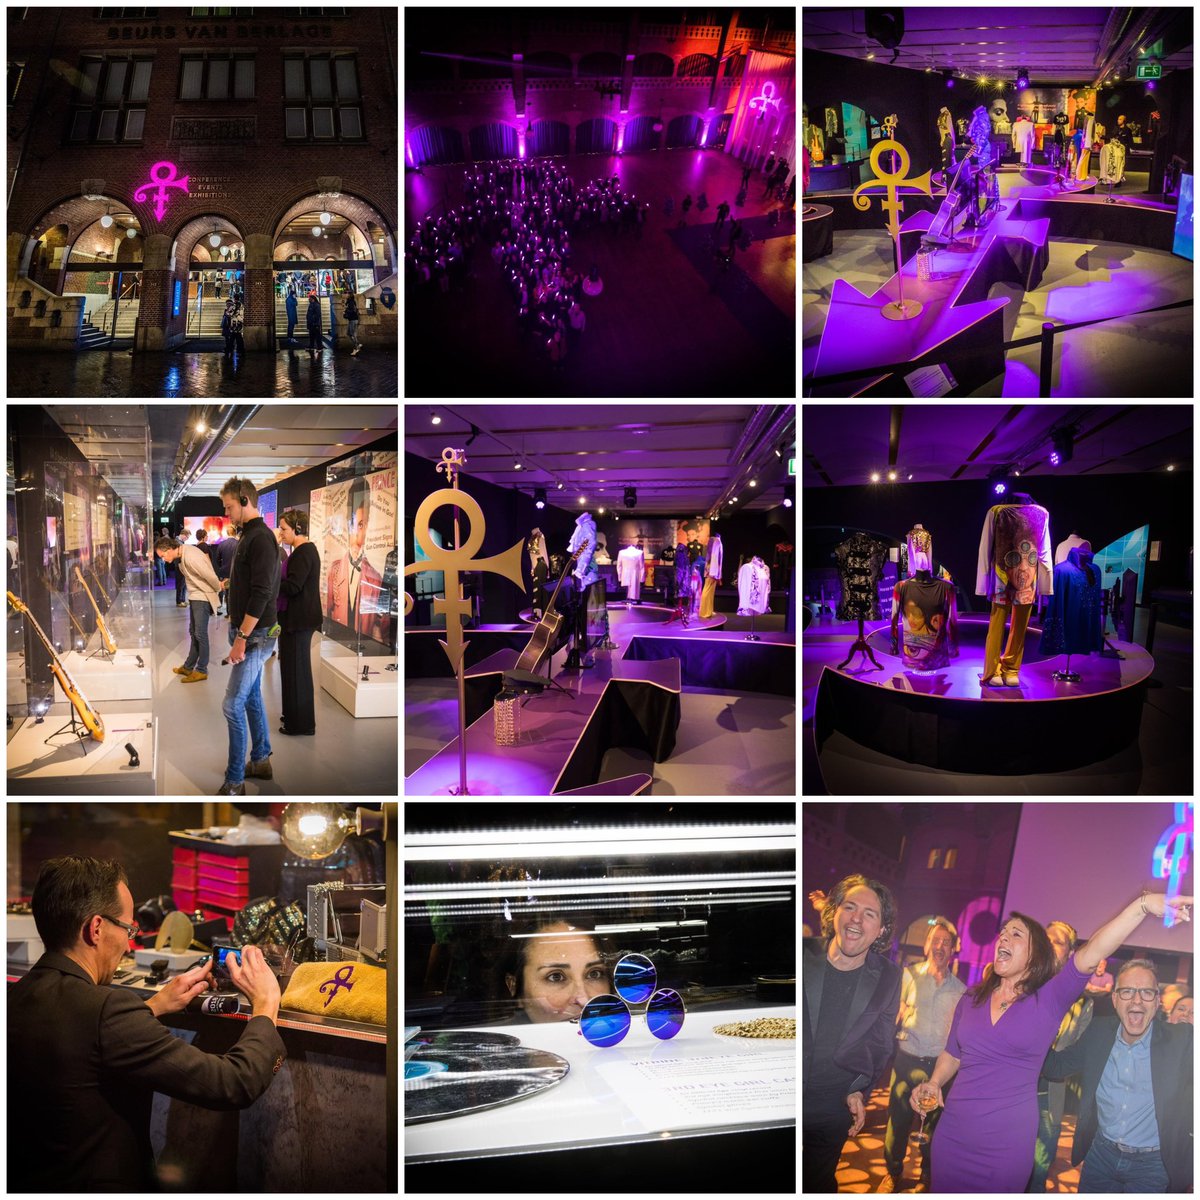 5 years ago today, the acclaimed @princeexpo was opened in @BeursVanBerlage #Amsterdam! Proud that I was the official photographer for that event, powered by @PaisleyPark  #PRINCE4EVER 💜